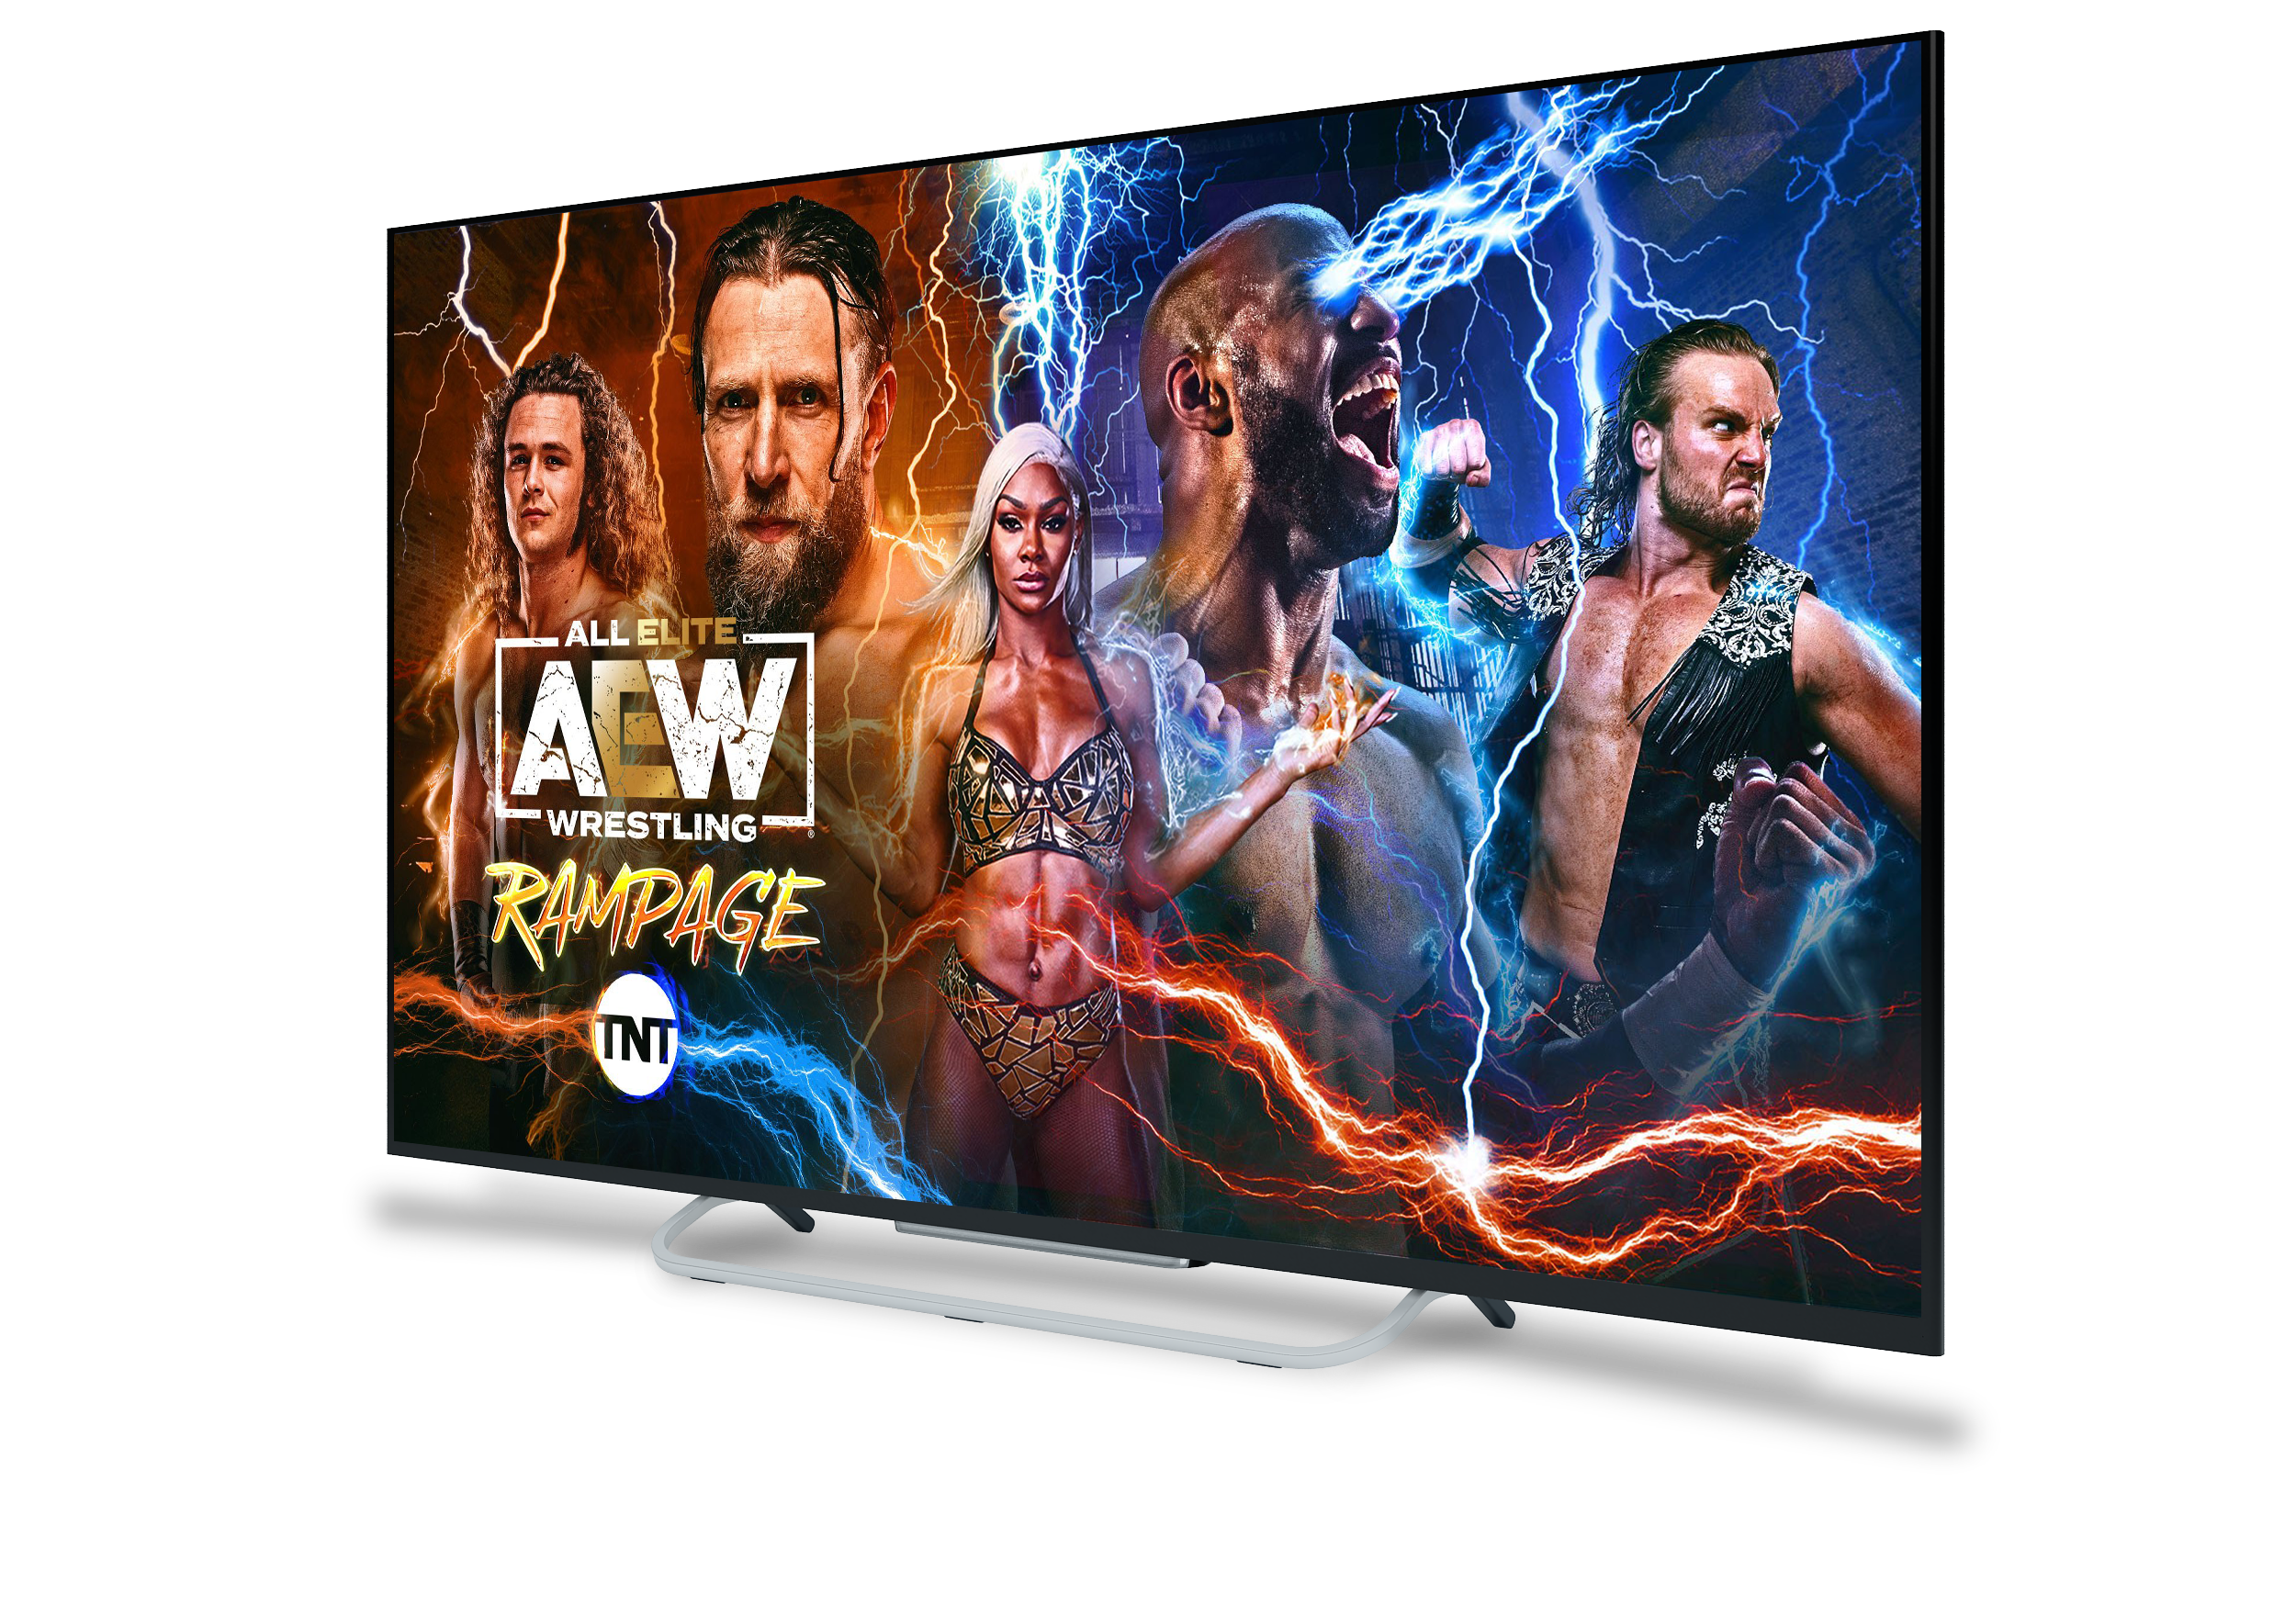 Television with All Elite AEW Wrestling Rampage on TNT on screen